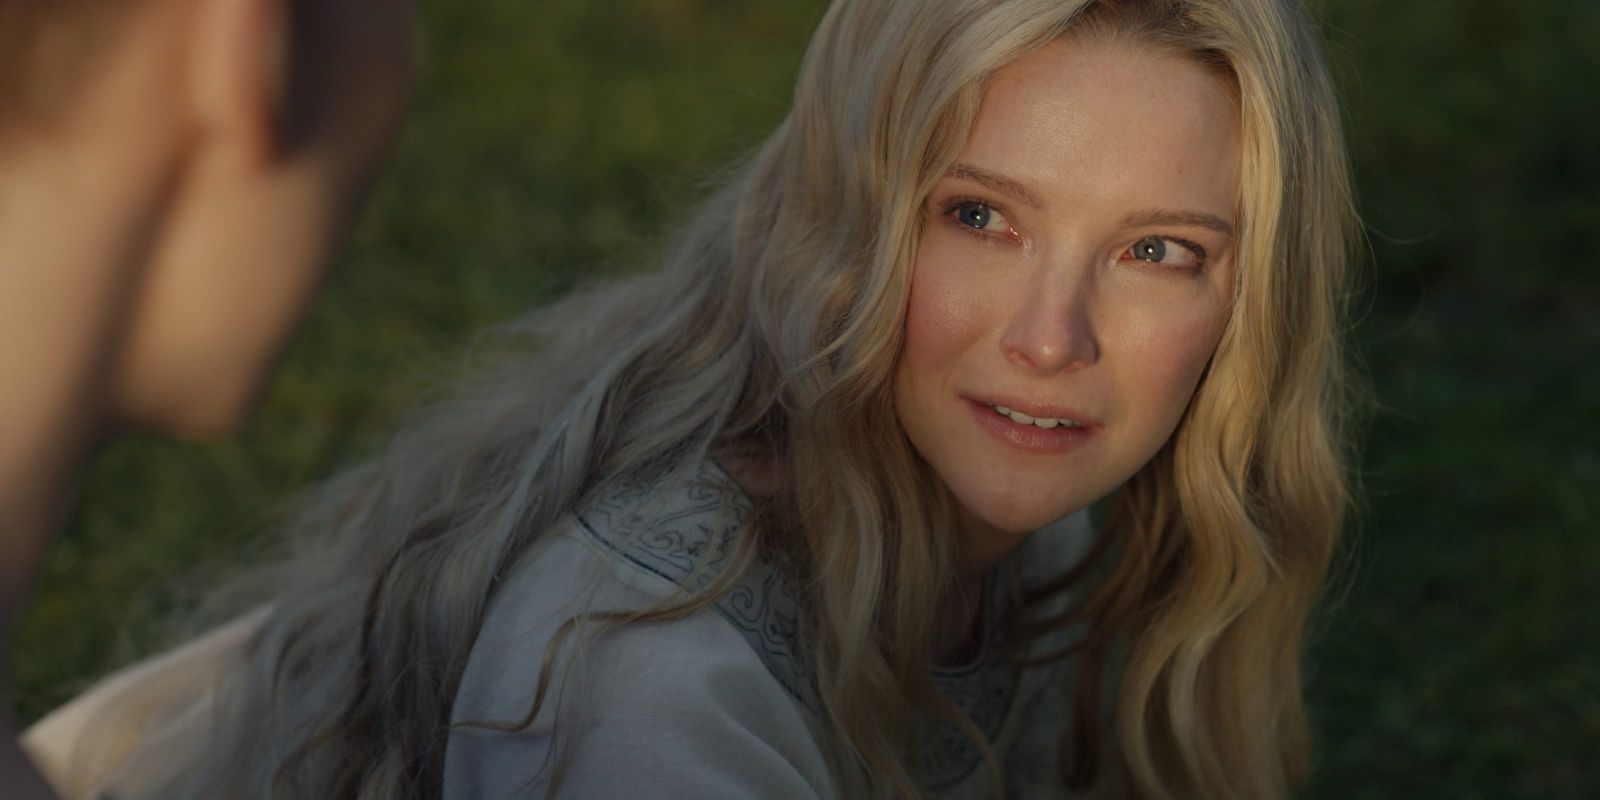 Galadriel looking up at Sauron's illusion of her brother in The Lord of the Rings The Rings of Power Season 1 Episode 8